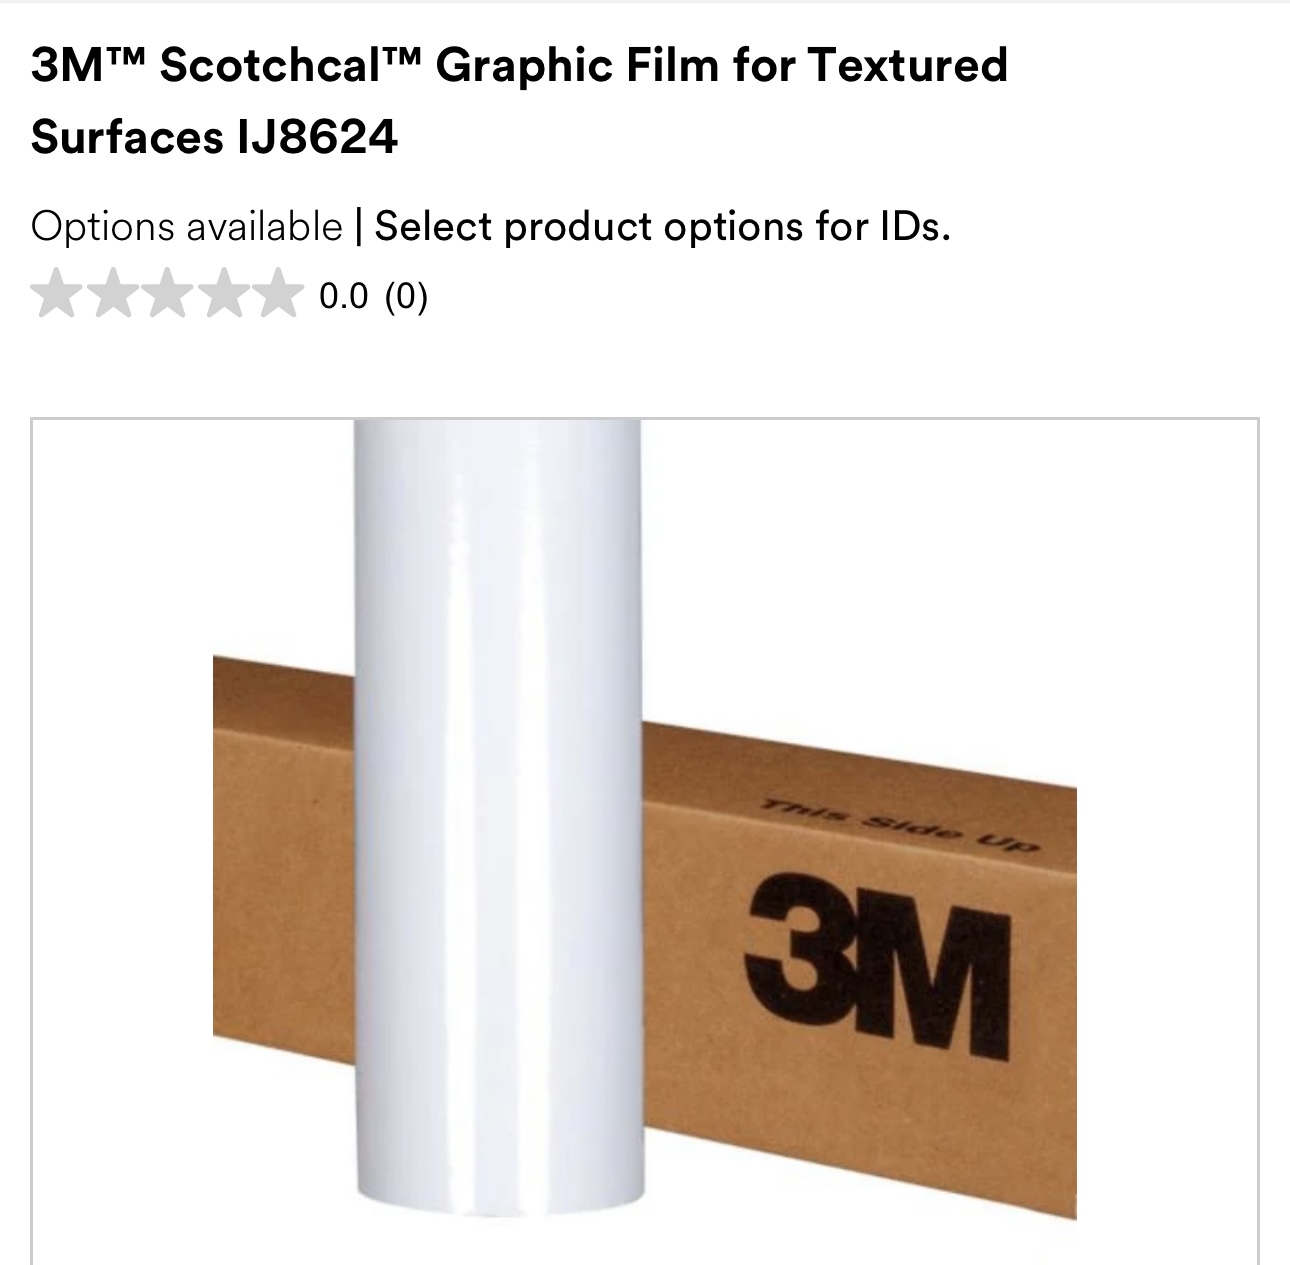  3M Clear Paint Surface Protection Vinyl Film (6 Inch x